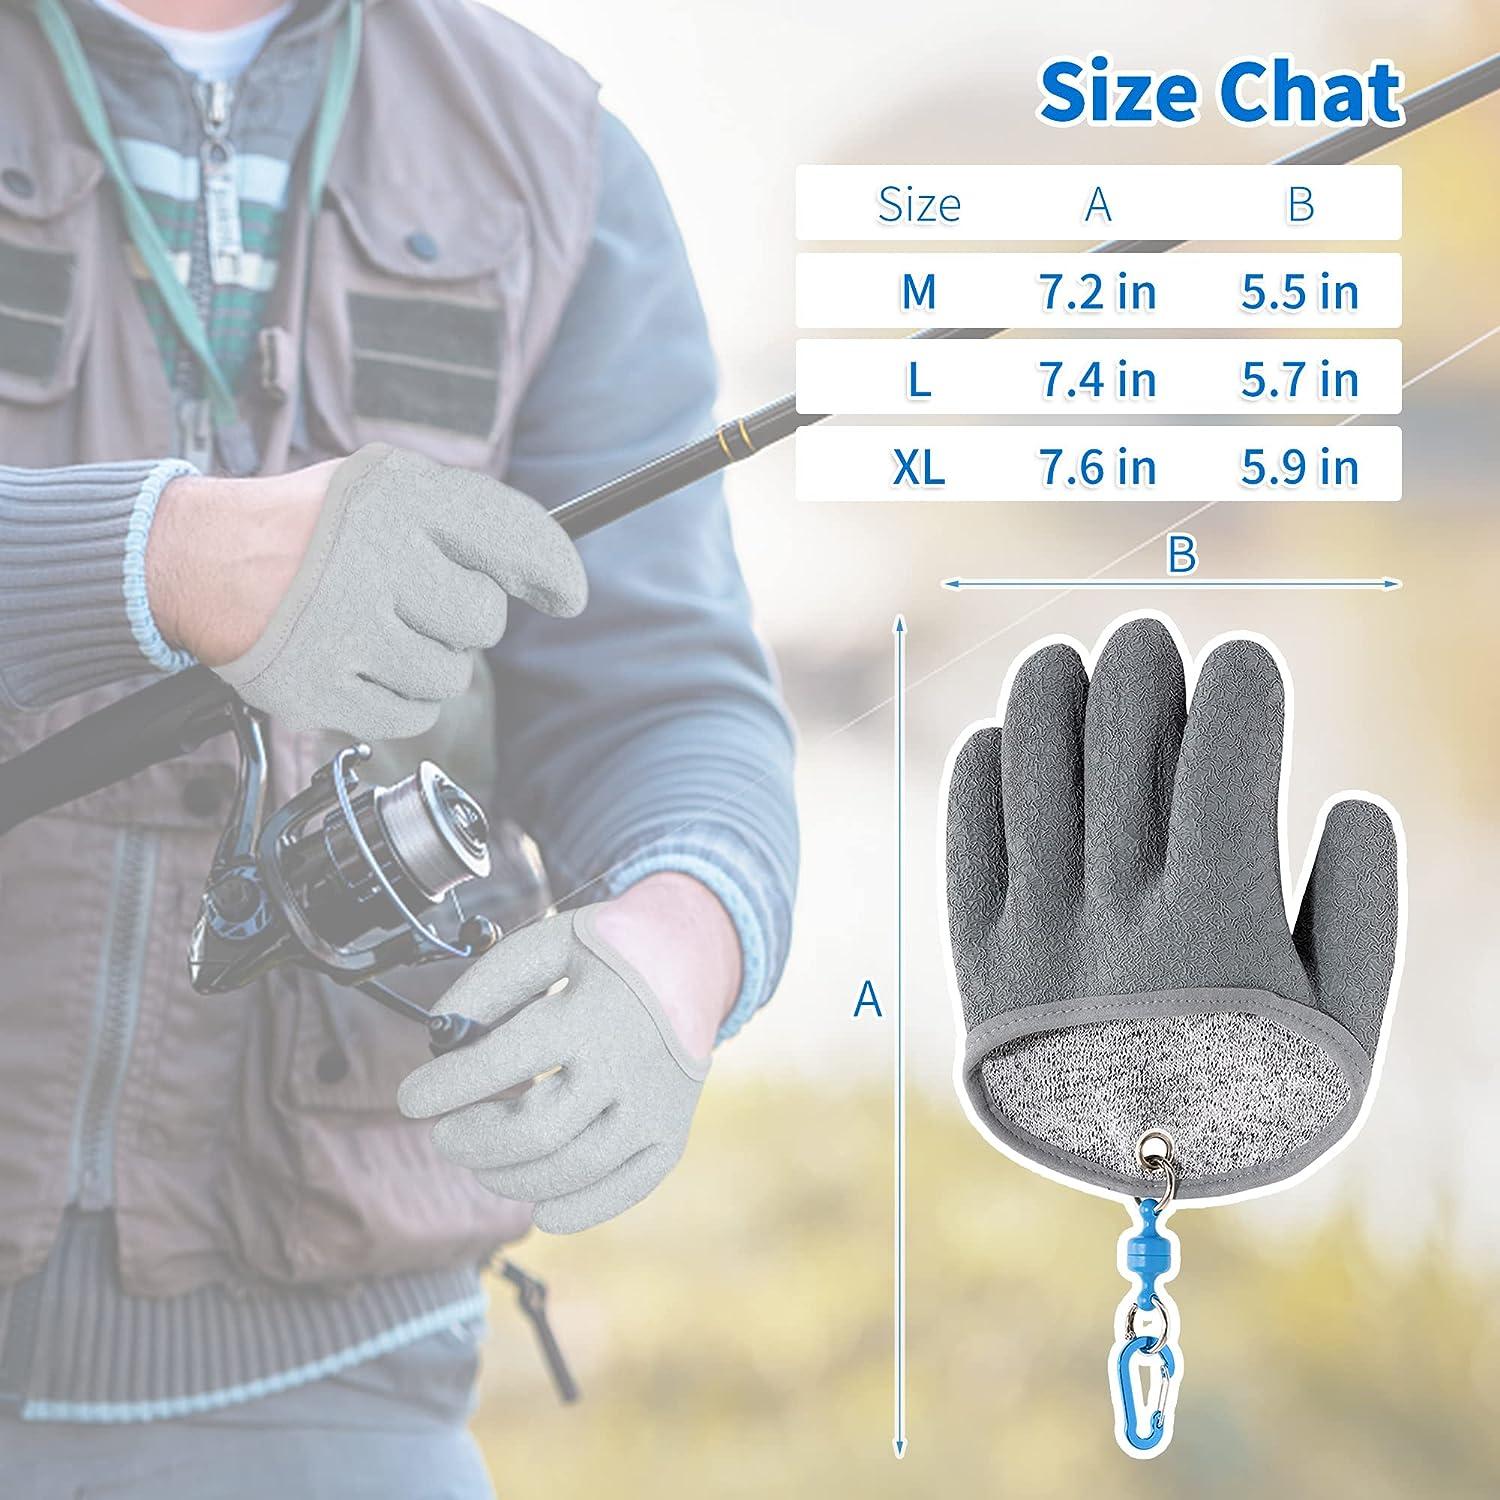 ARCLIBER Fishing Glove for Men with Magnet Release, Puncture